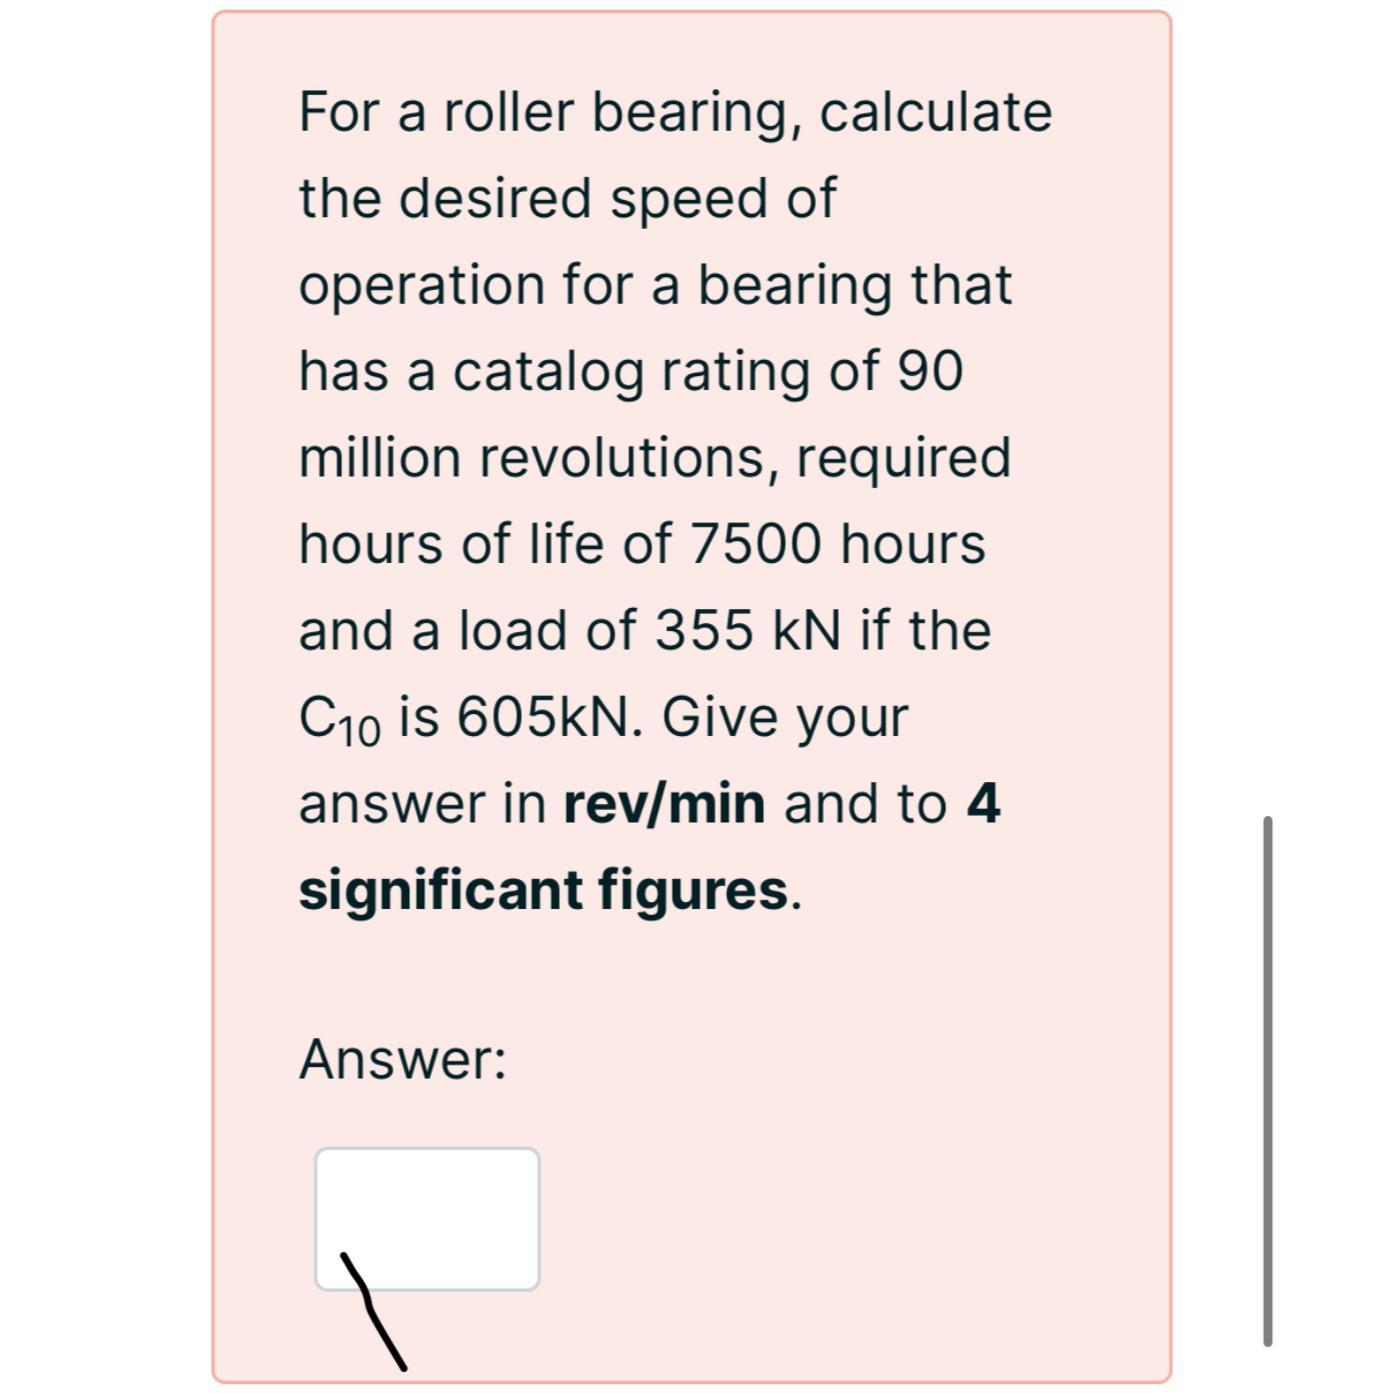 For a roller bearing, calculate the desired speed of operation for a bearing that has a catalog rating of 90